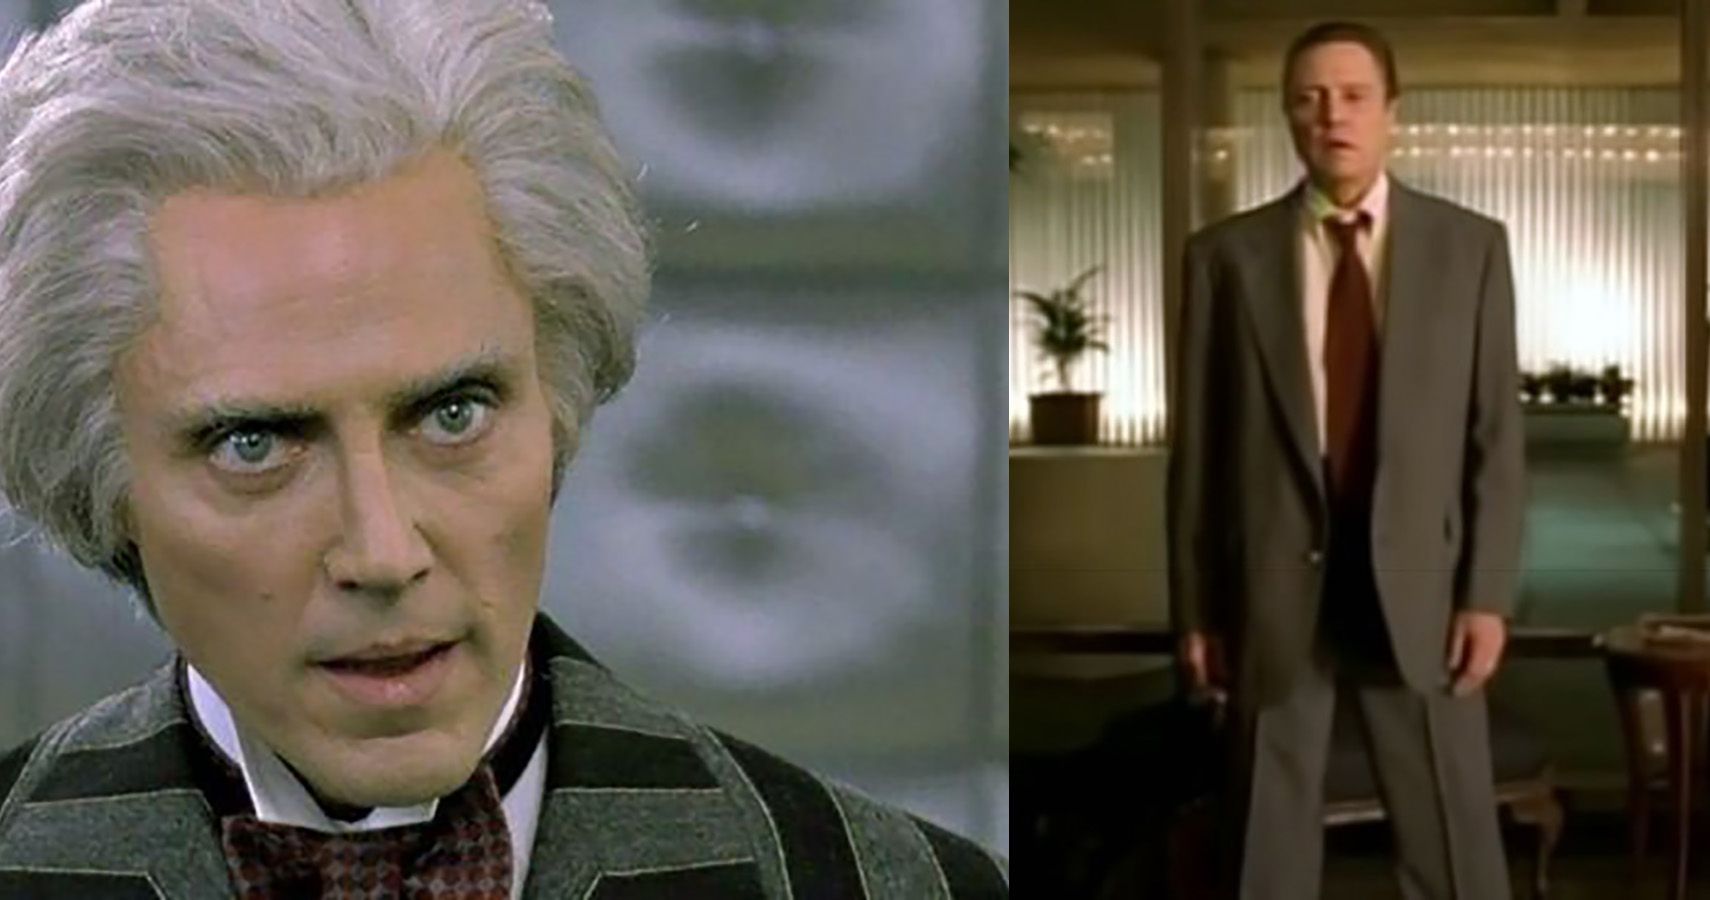 10 Fascinating Things You Didn't Know About Christopher Walken